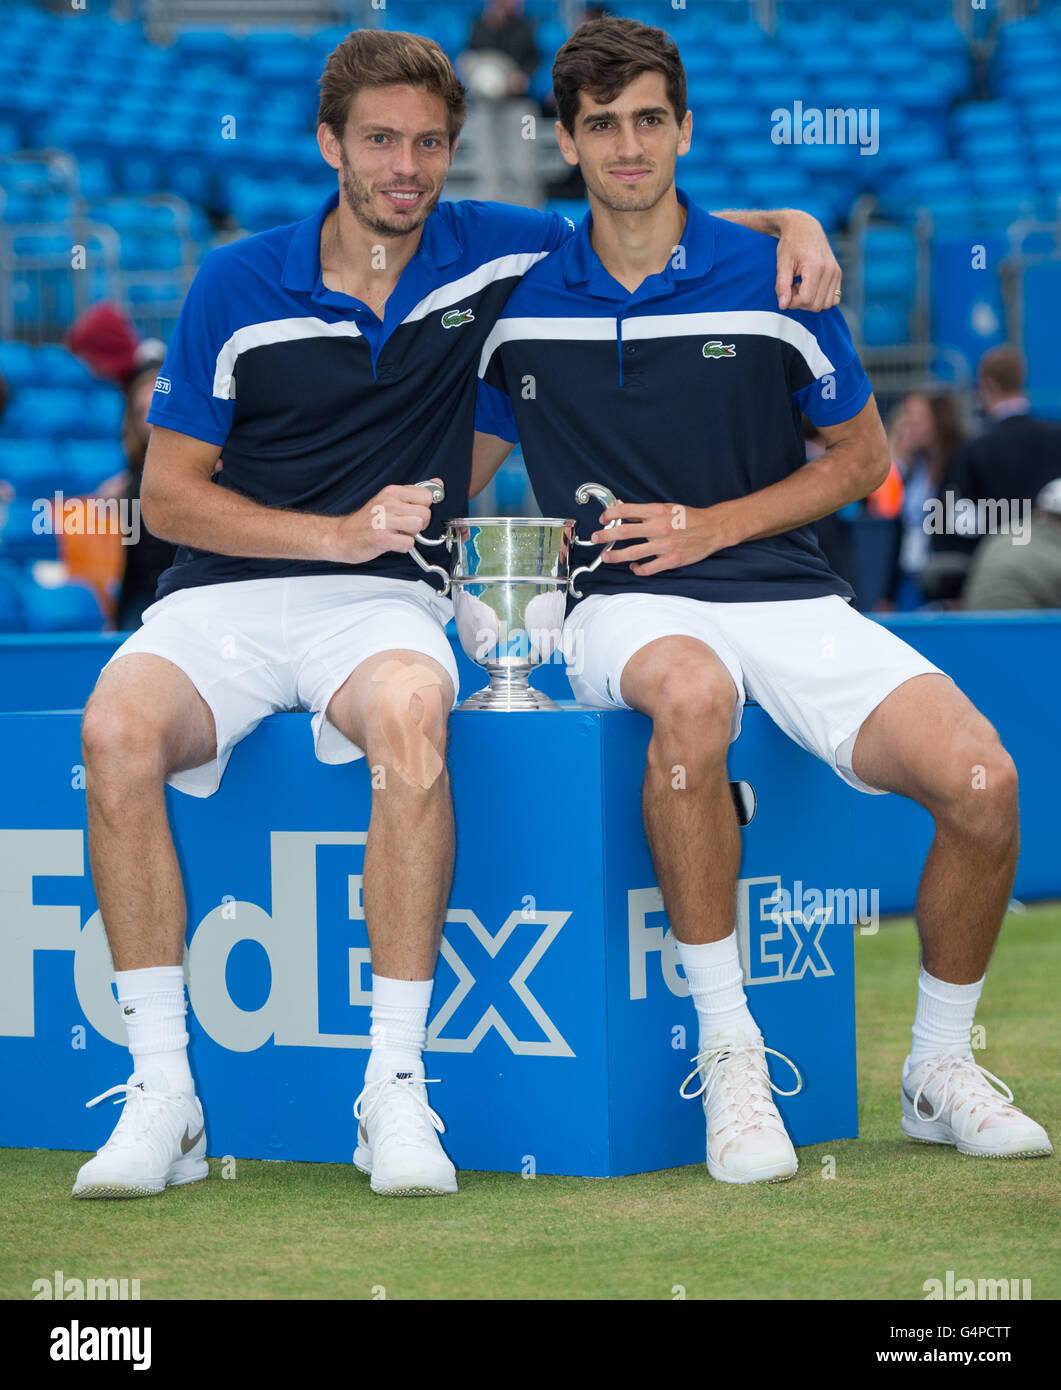 London, UK. 19th June, 2016. Nicolas Mahut (L) and Pierre-Hugues Herbert of France lift the Men's Doubles Trophy after victory against Chris Guccione of Australia and Andre Sa of Brazil during the Men's Doubles final on day seven of the ATP-500 Aegon Championships at the Queen's Club in London, Britain on June 19, 2016. © Jon Buckle/Xinhua/Alamy Live News Stock Photo